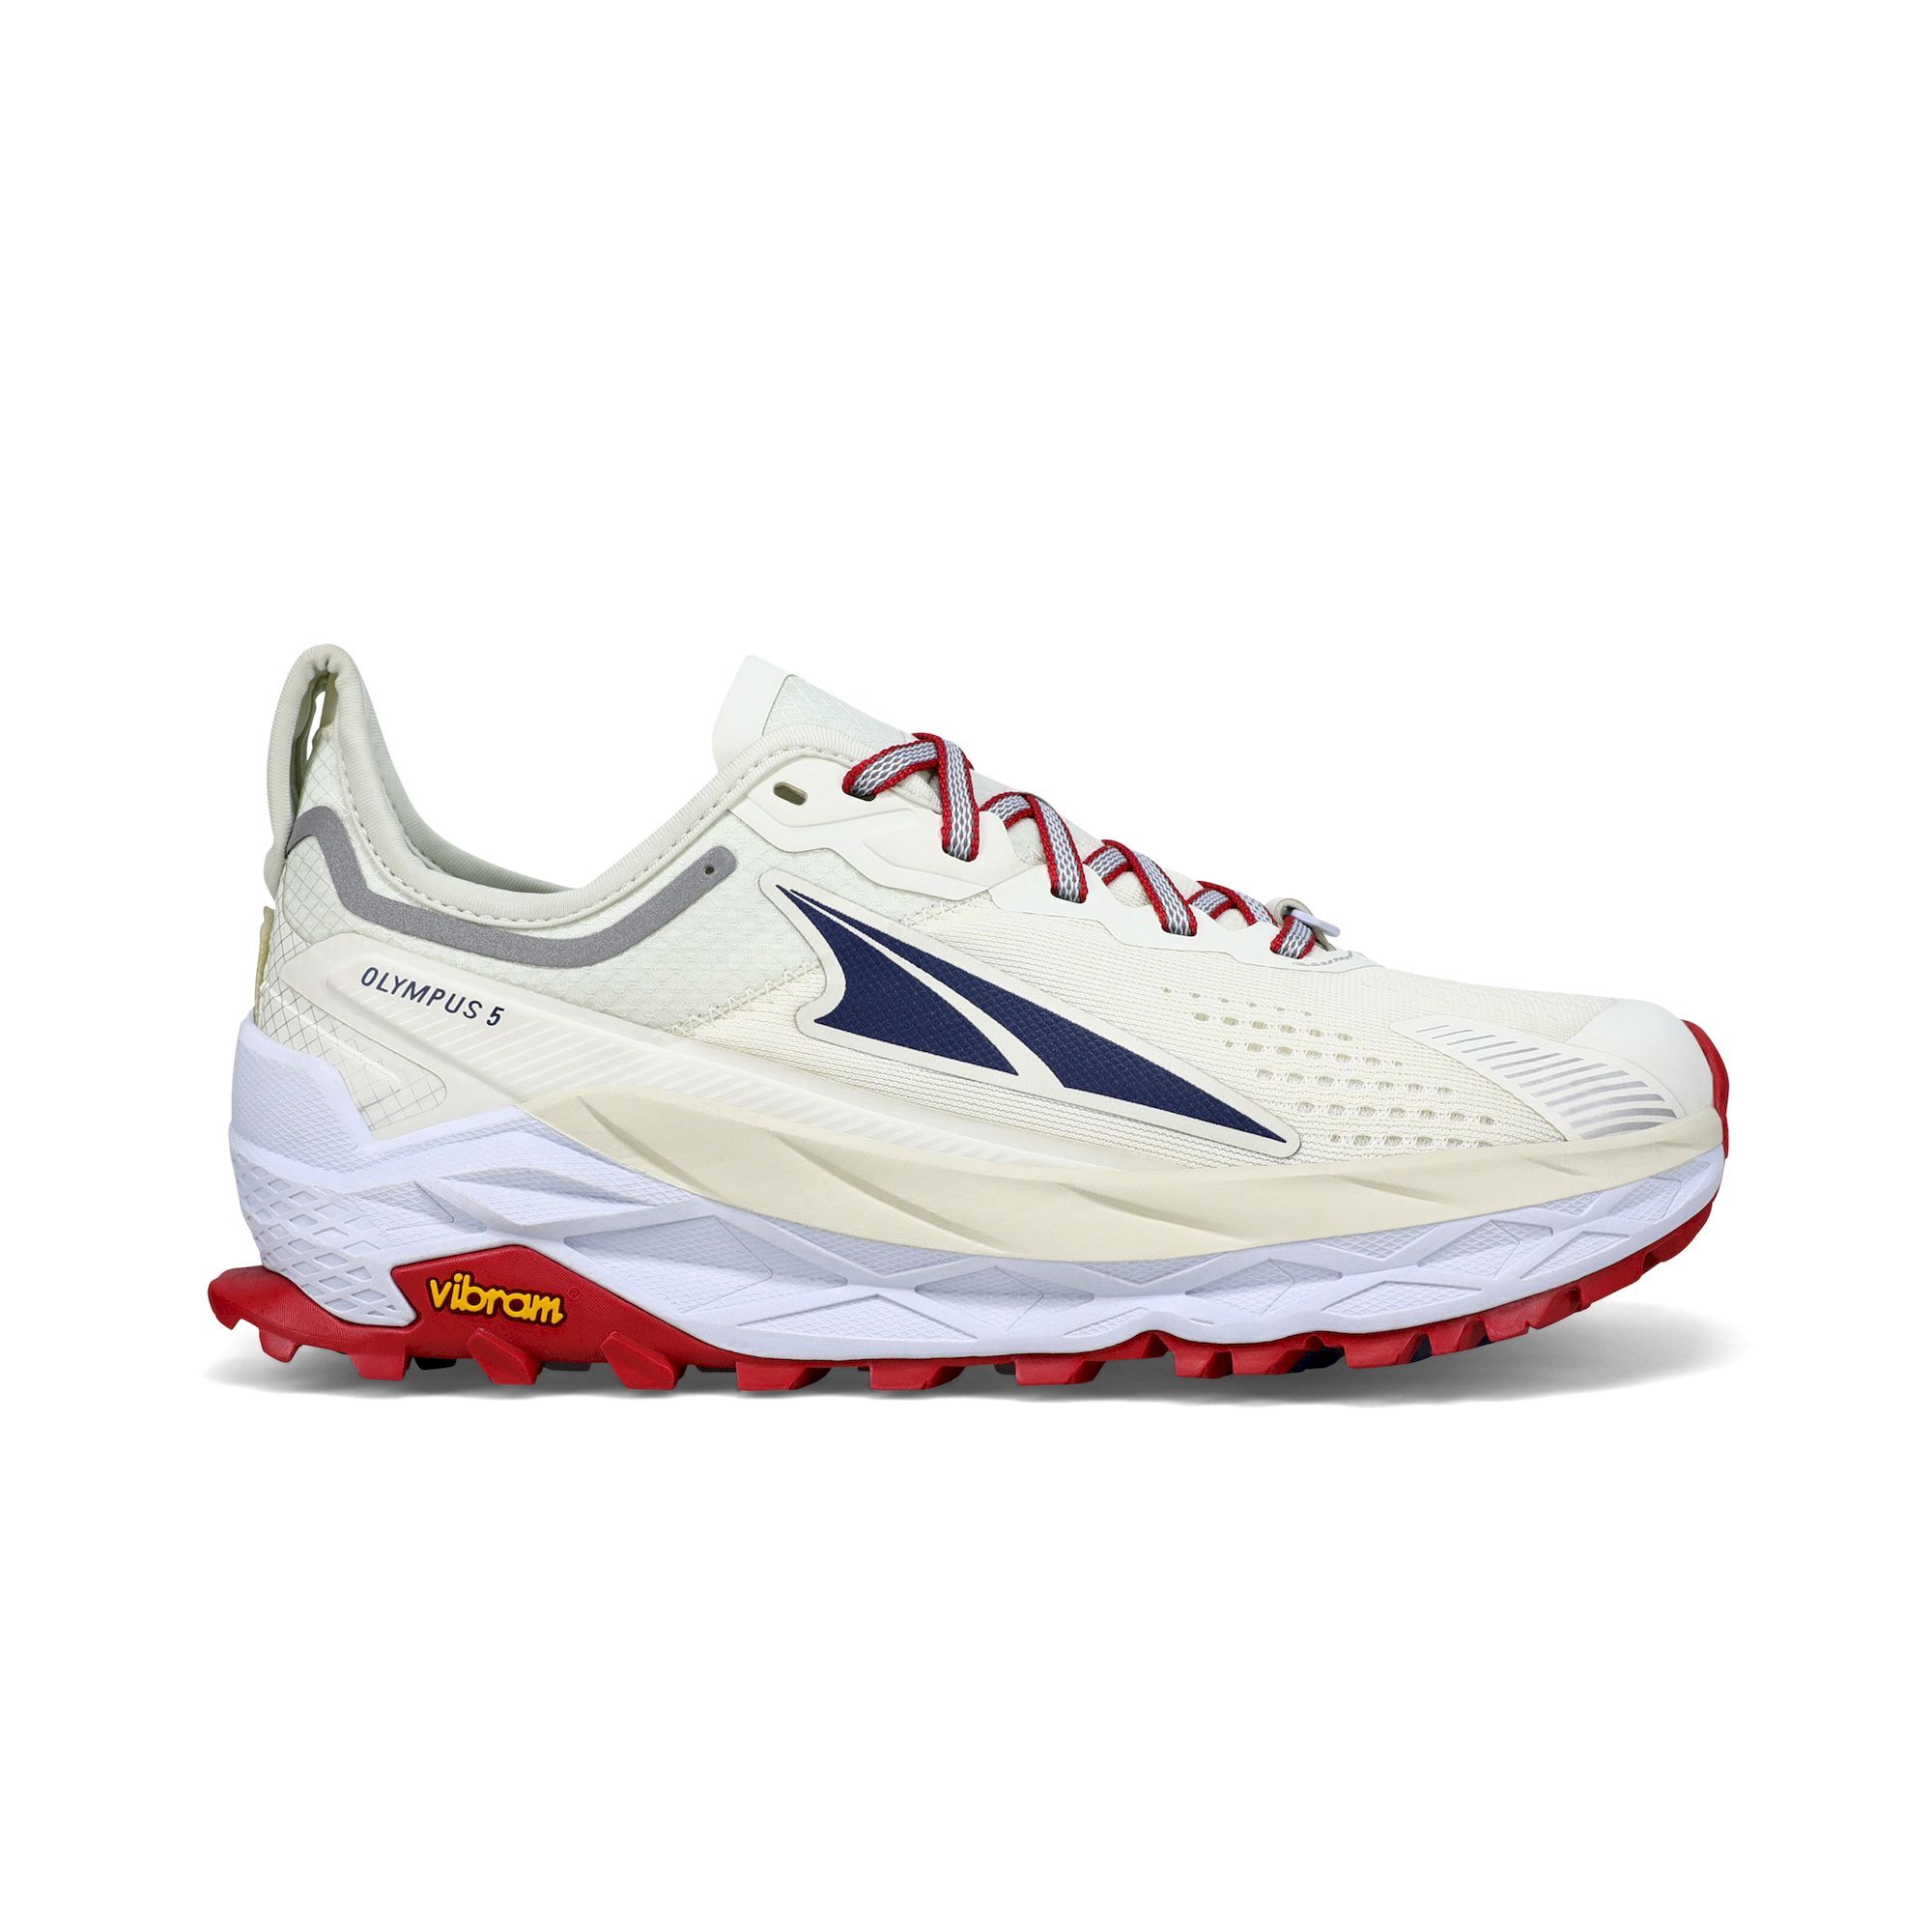 Altra Olympus 5 - Trail running shoes - Women's